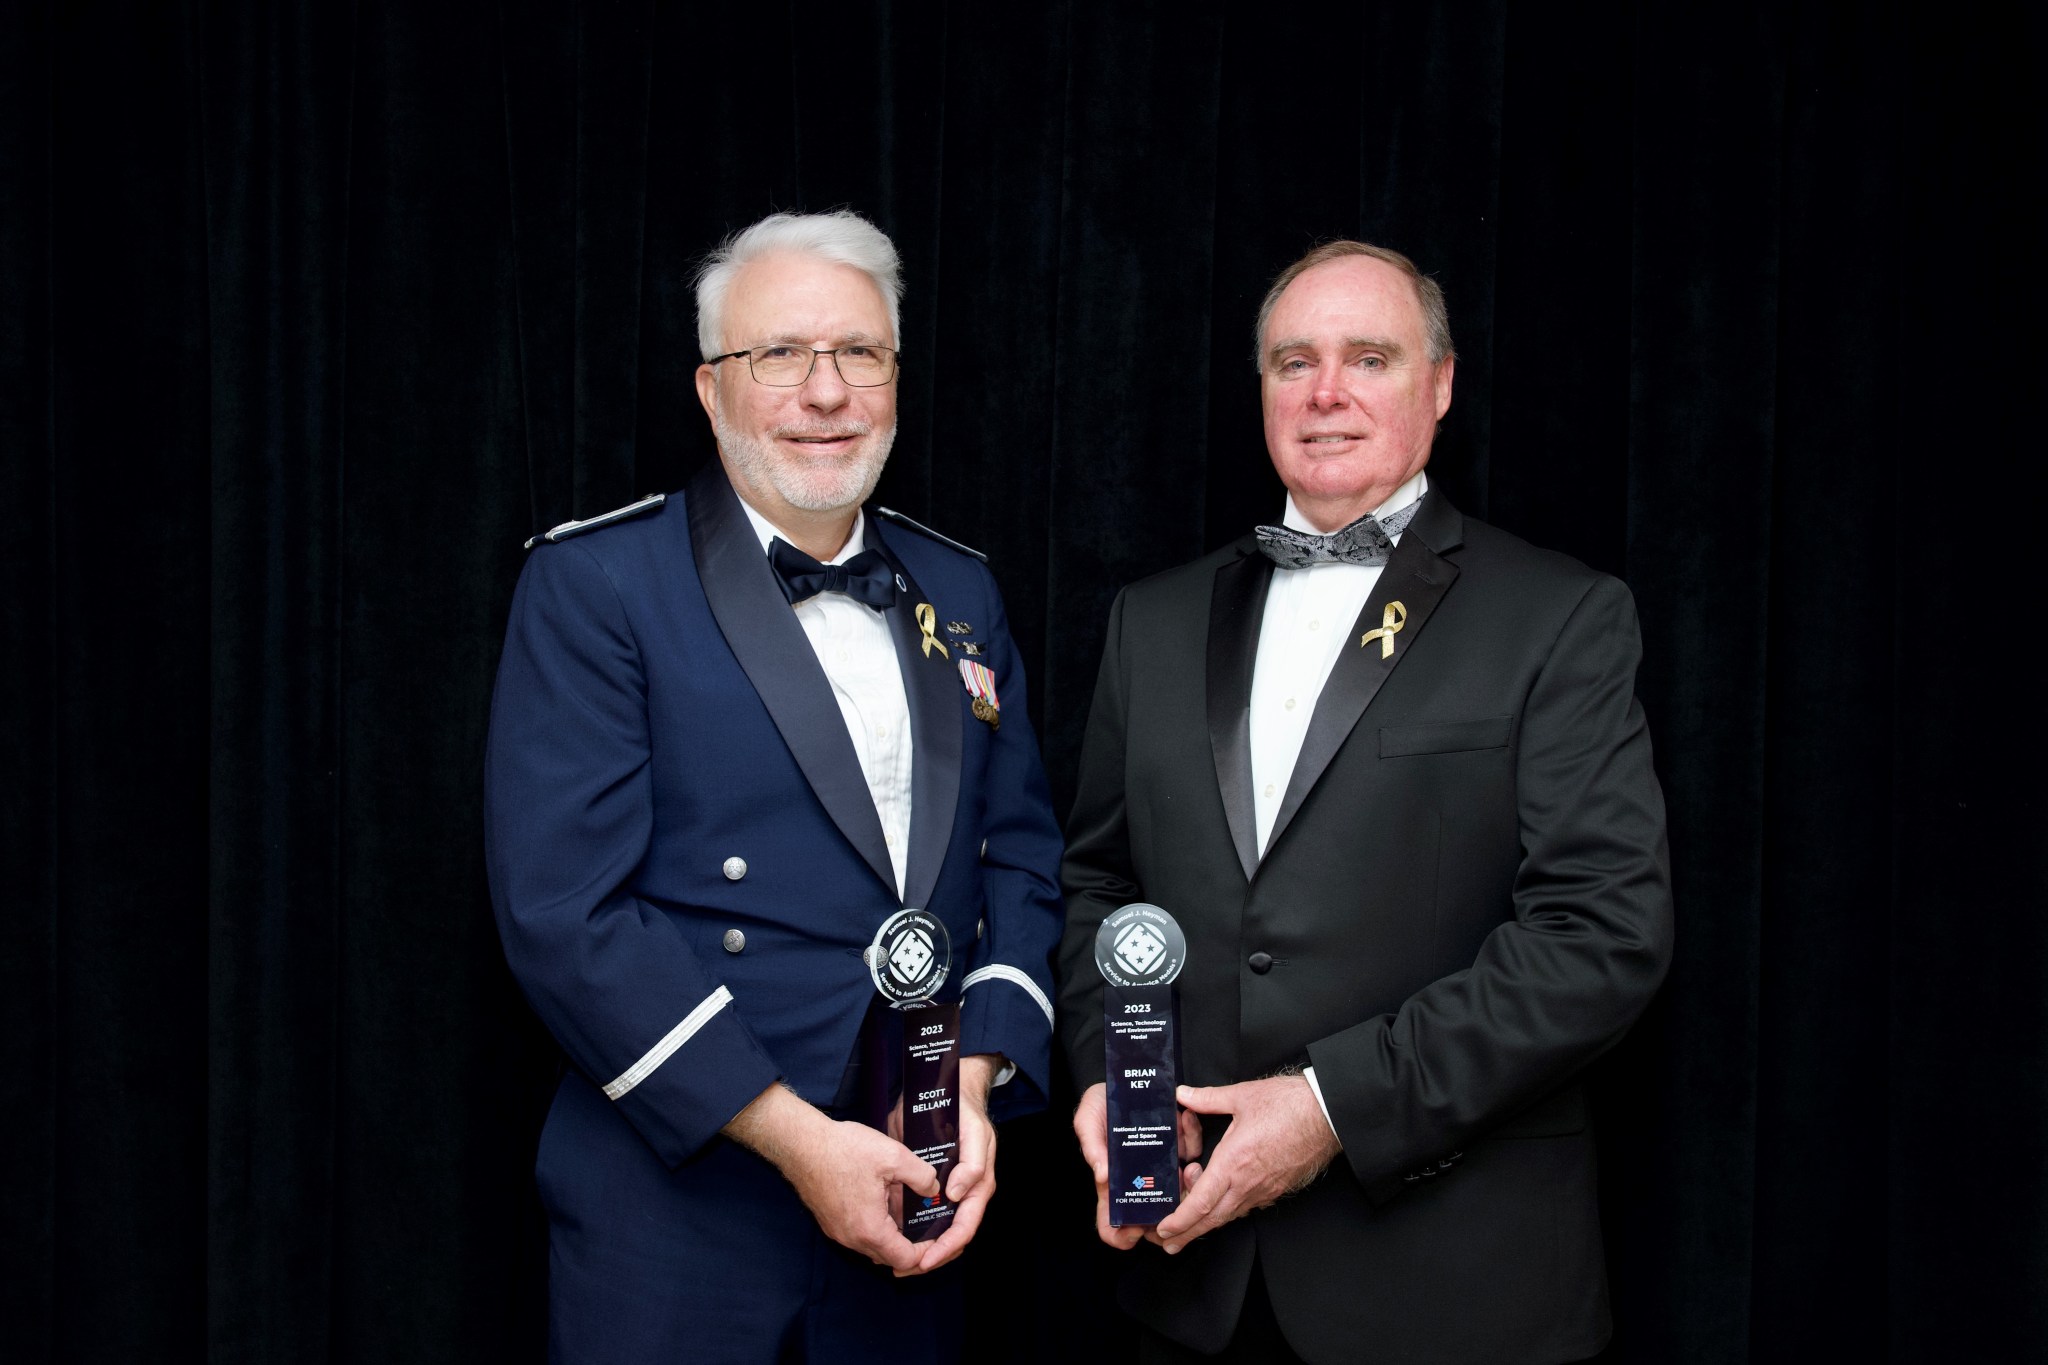 Scott Bellamy, left, and Brian Key, right, stop for a photo moments after receiving the Samuel J. Heyman Service to America Medals. Bellamy and Key accepted on behalf of the entire DART team during a ceremony at the John F. Kennedy Center for Performing Arts in Washington on Oct. 17.